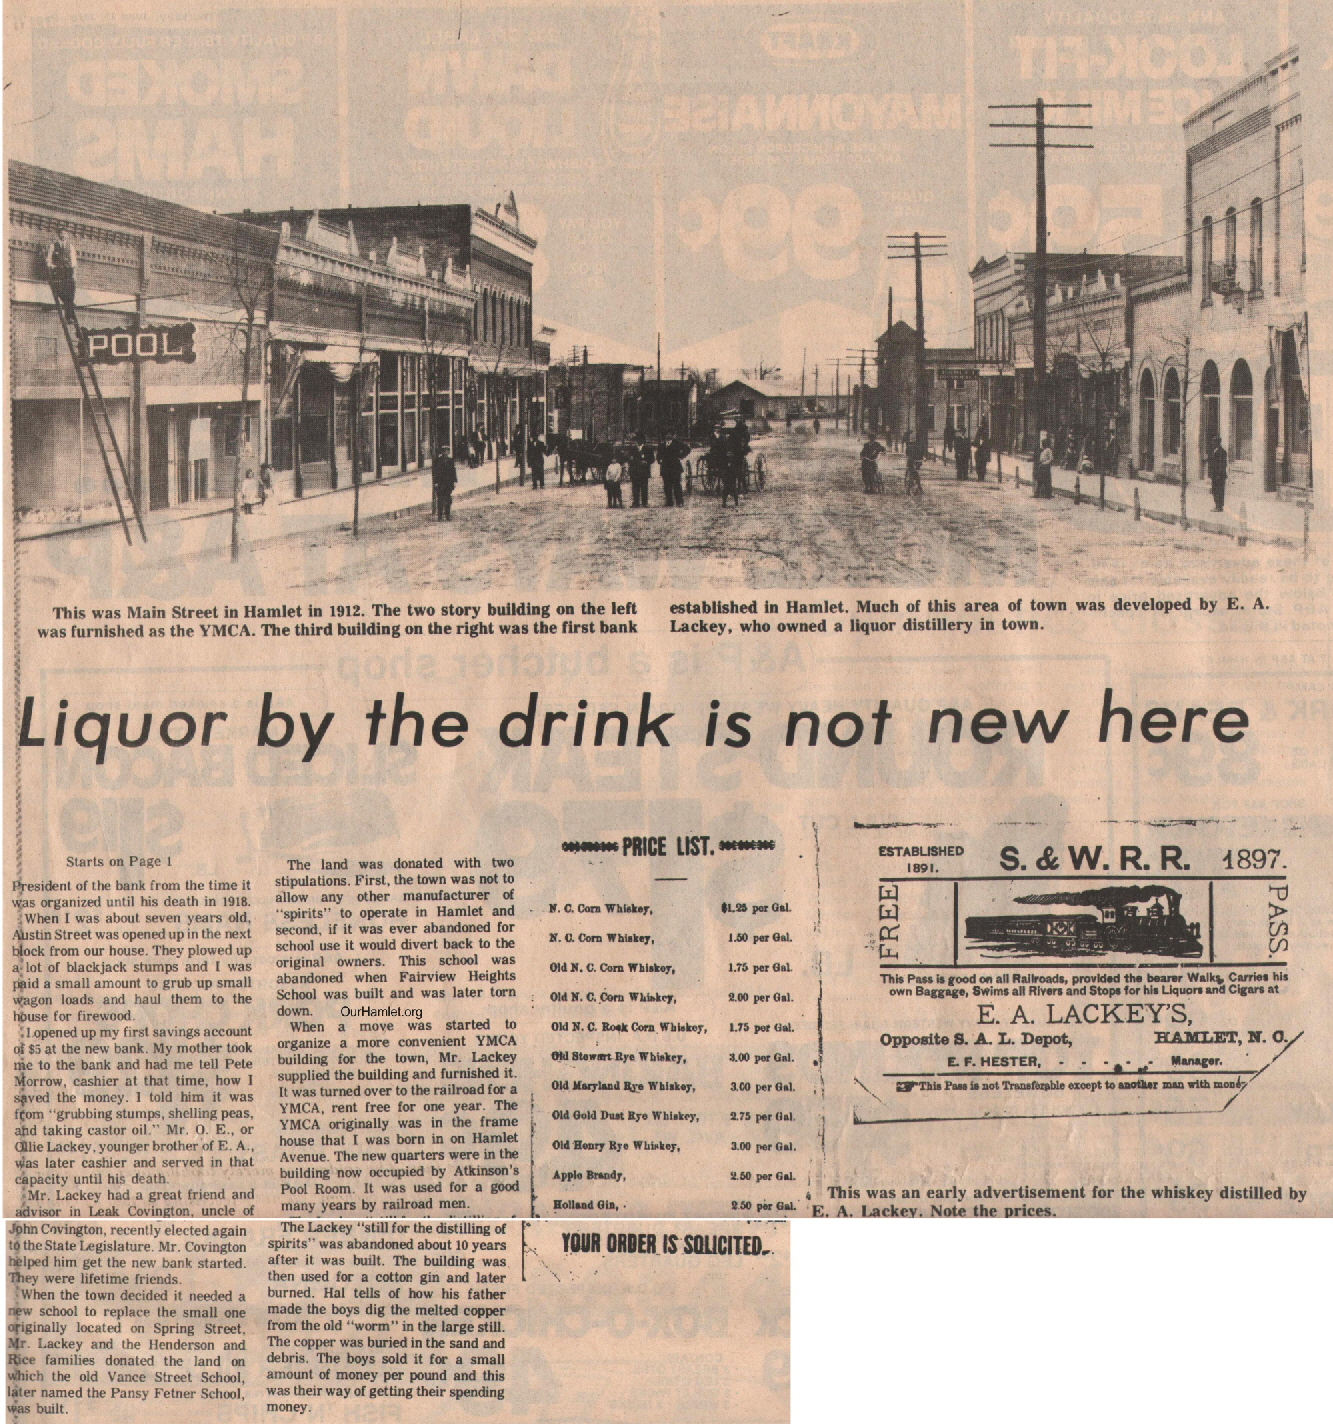 The Squire - Liquor by the drink is not new here2 OH